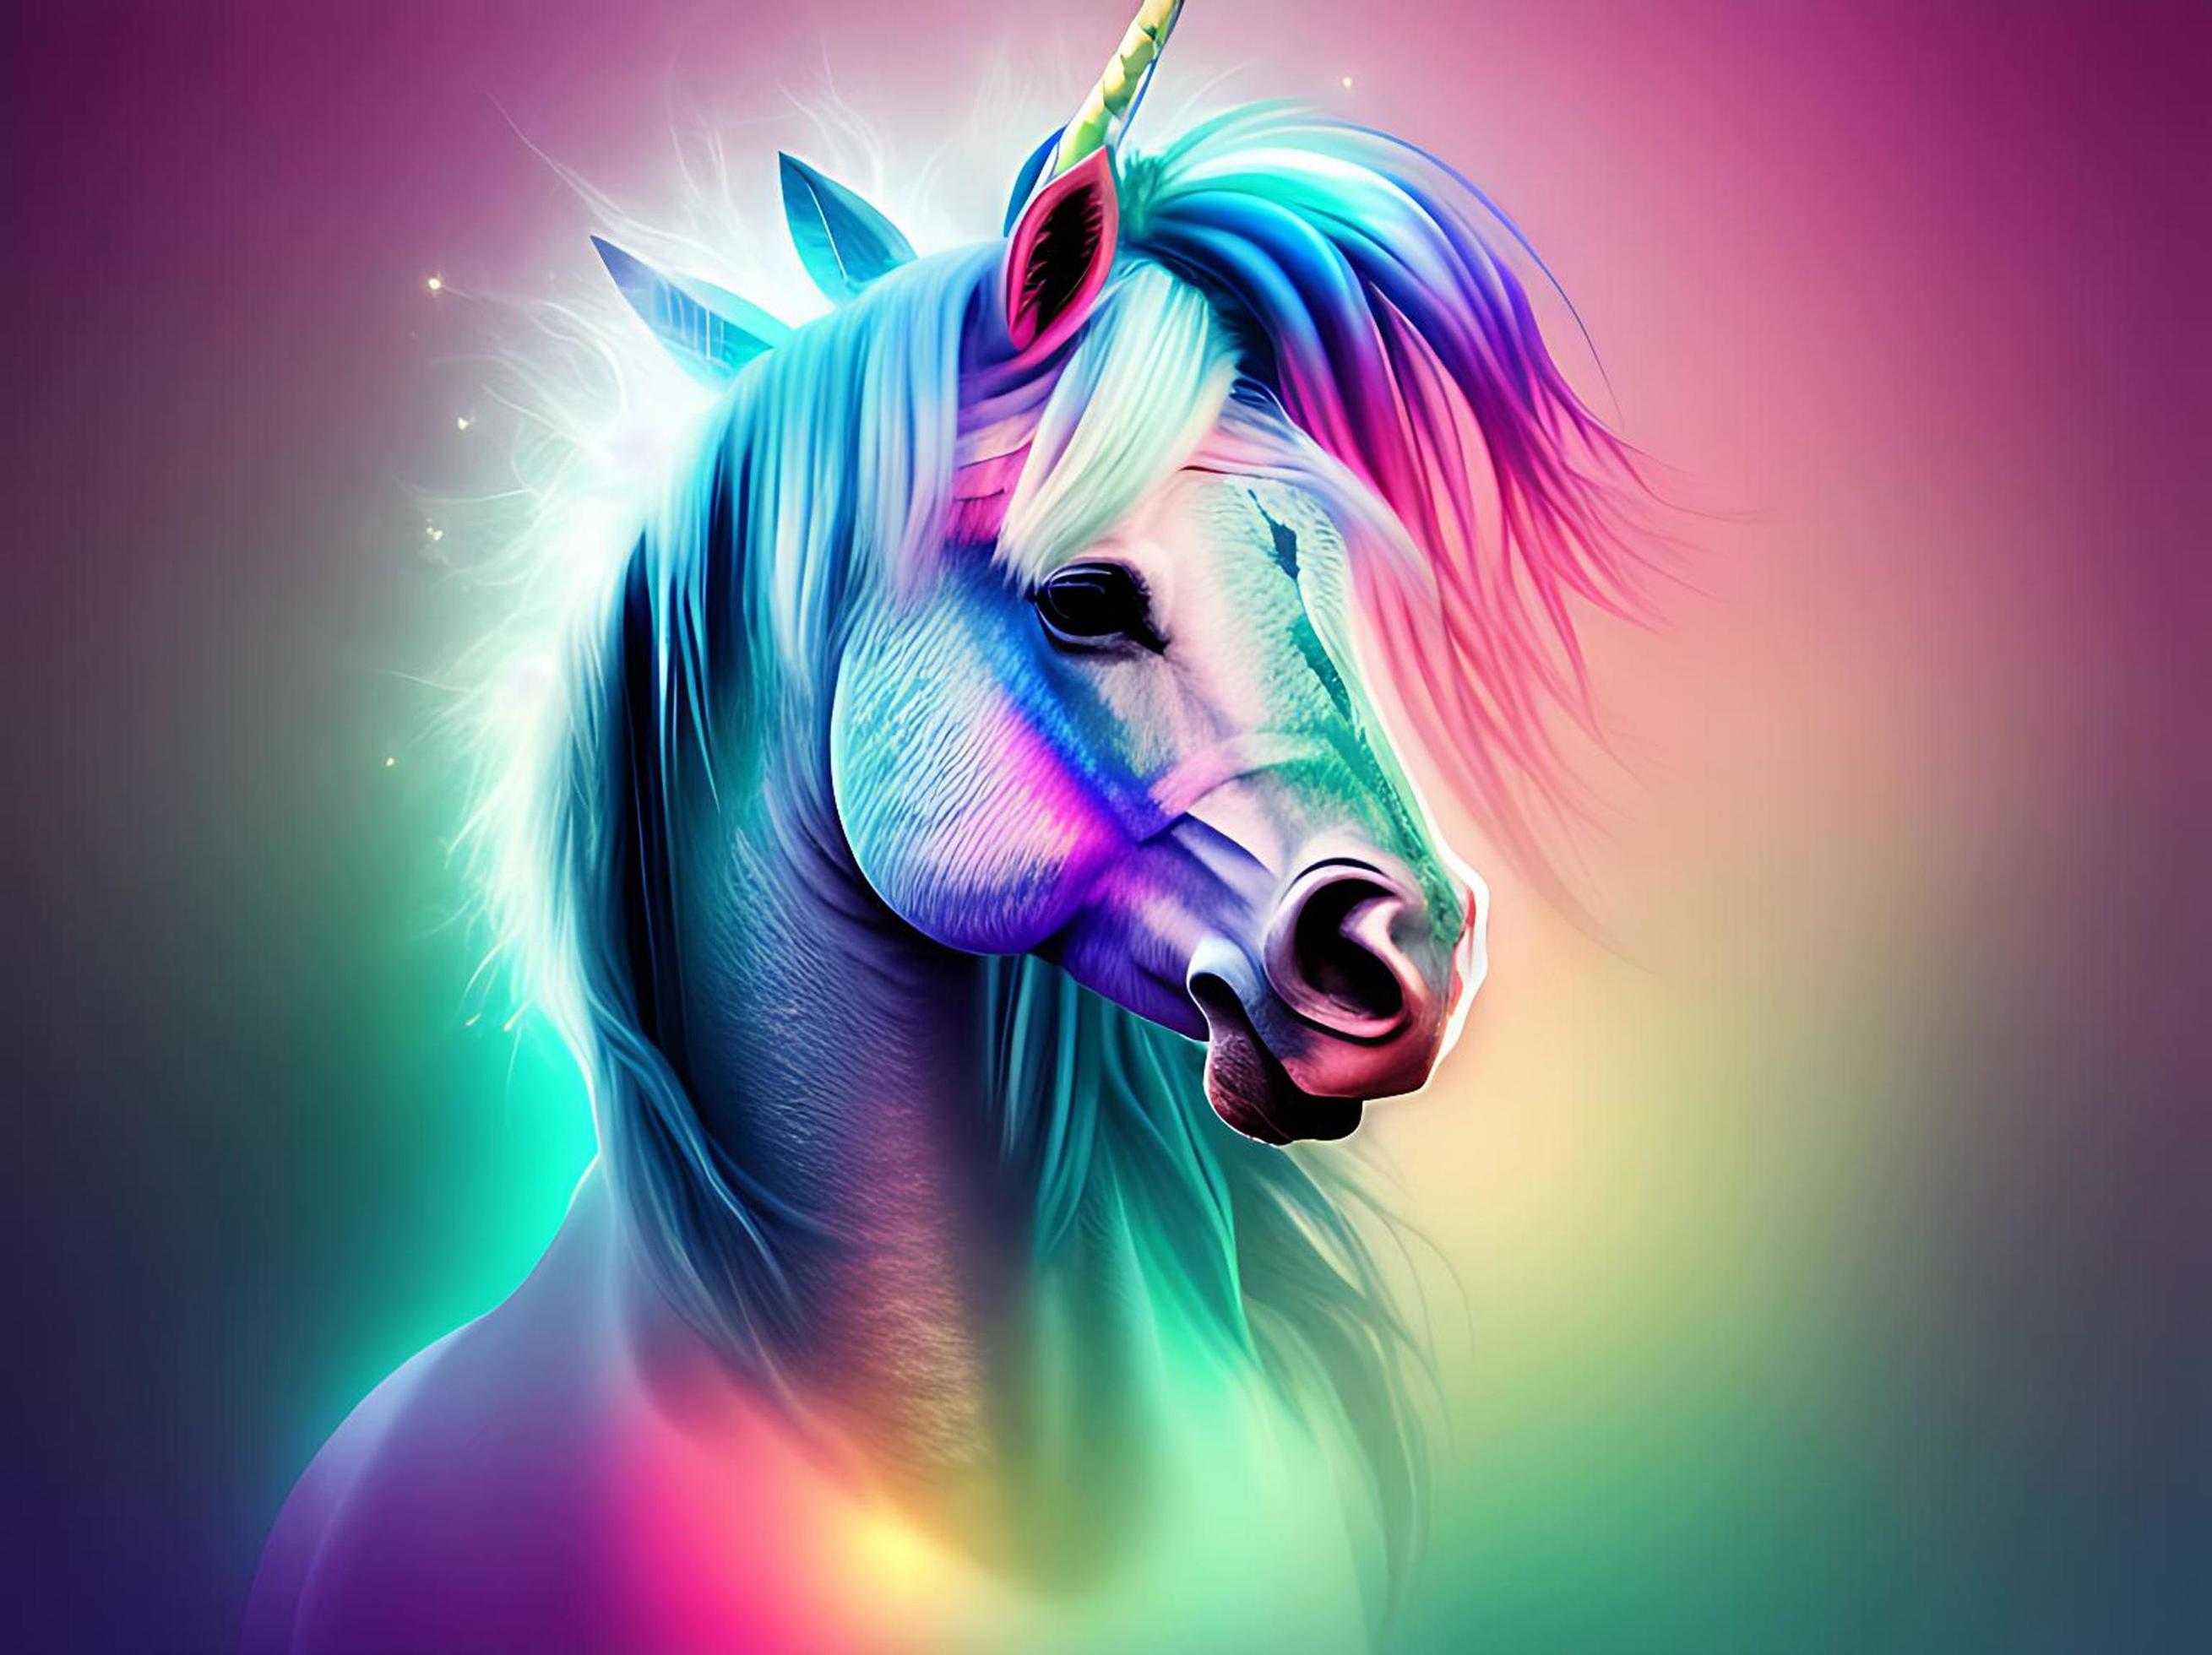 A colorful unicorn with rainbow mane and horn - Unicorn